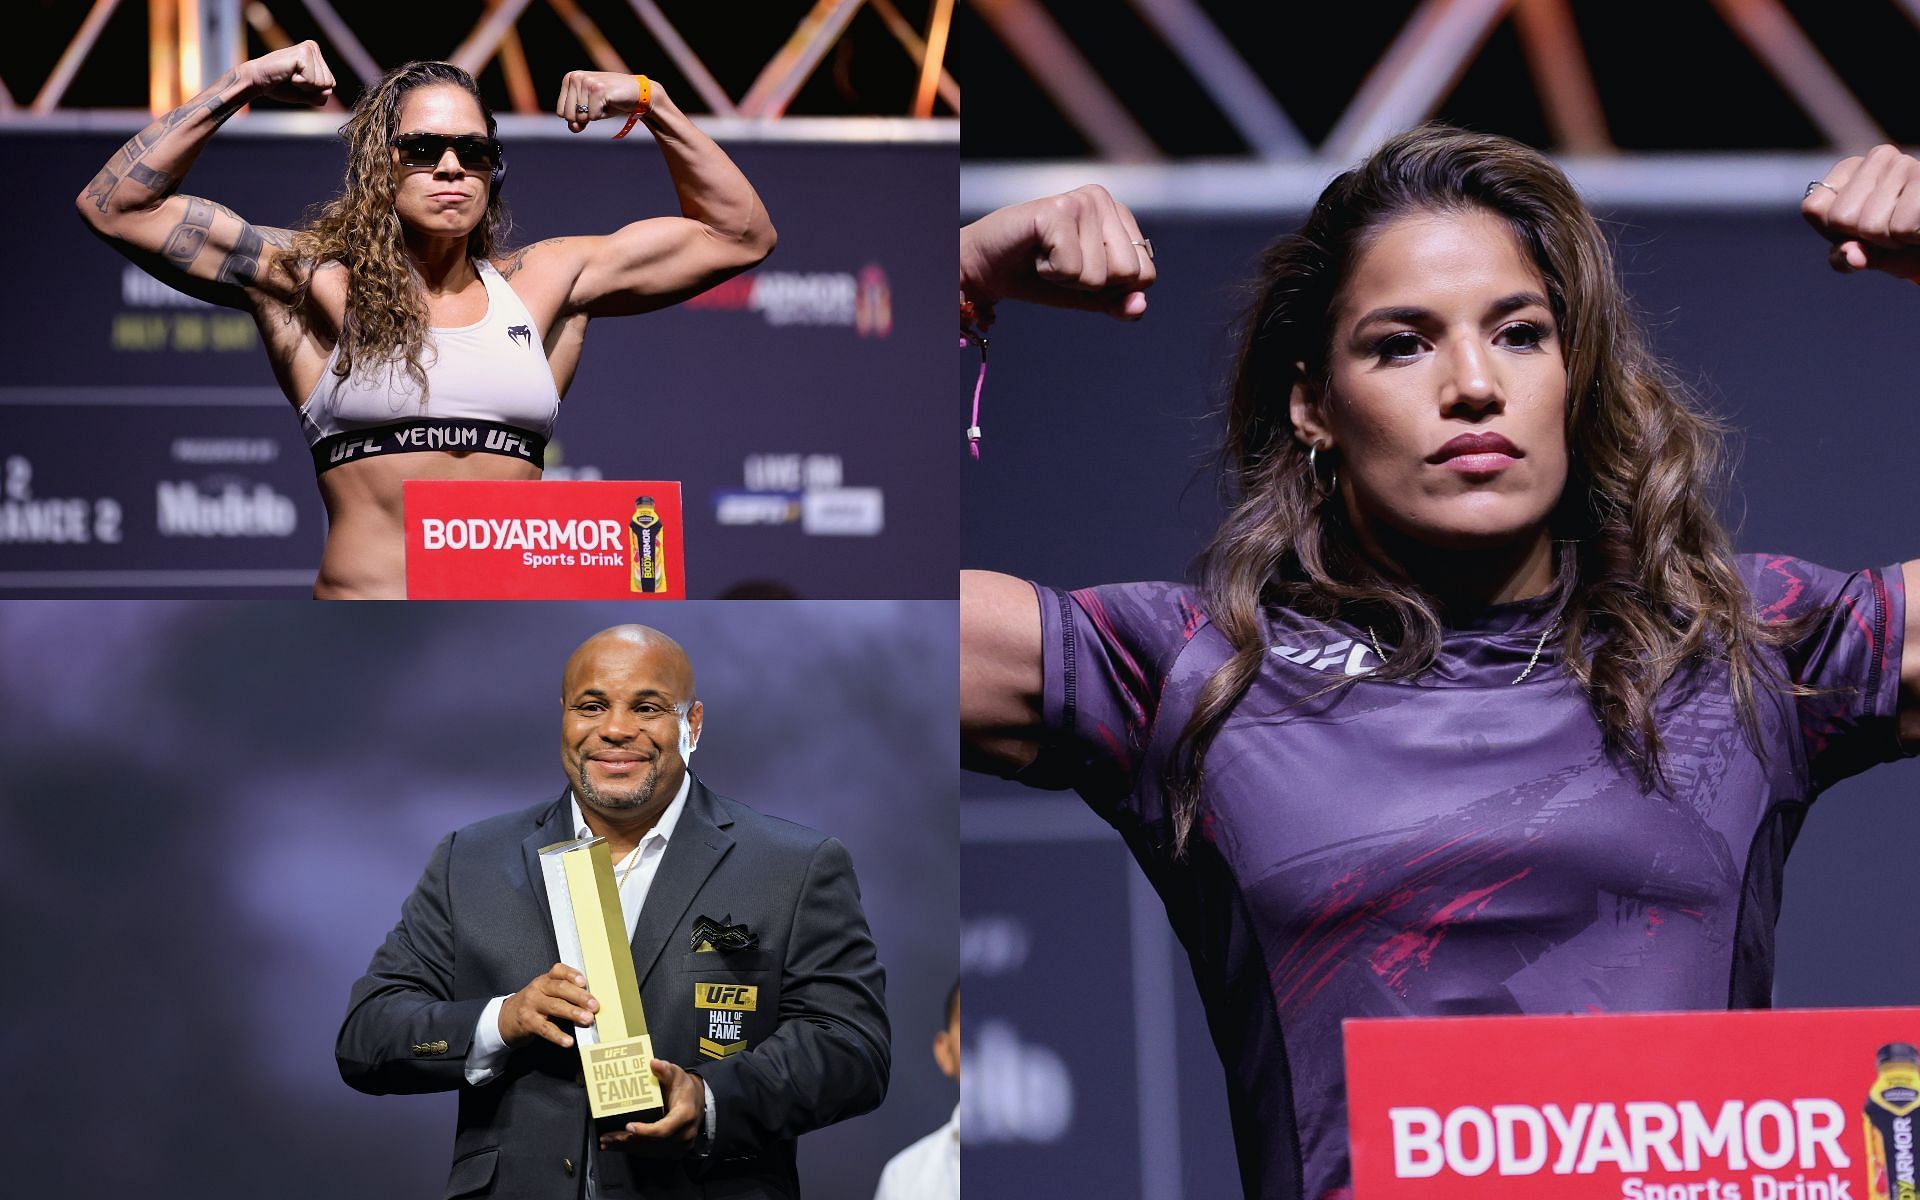 Daniel Cormier and Amanda Nunes (left) and Julianna Pena (right) [image courtesy: Getty Images]